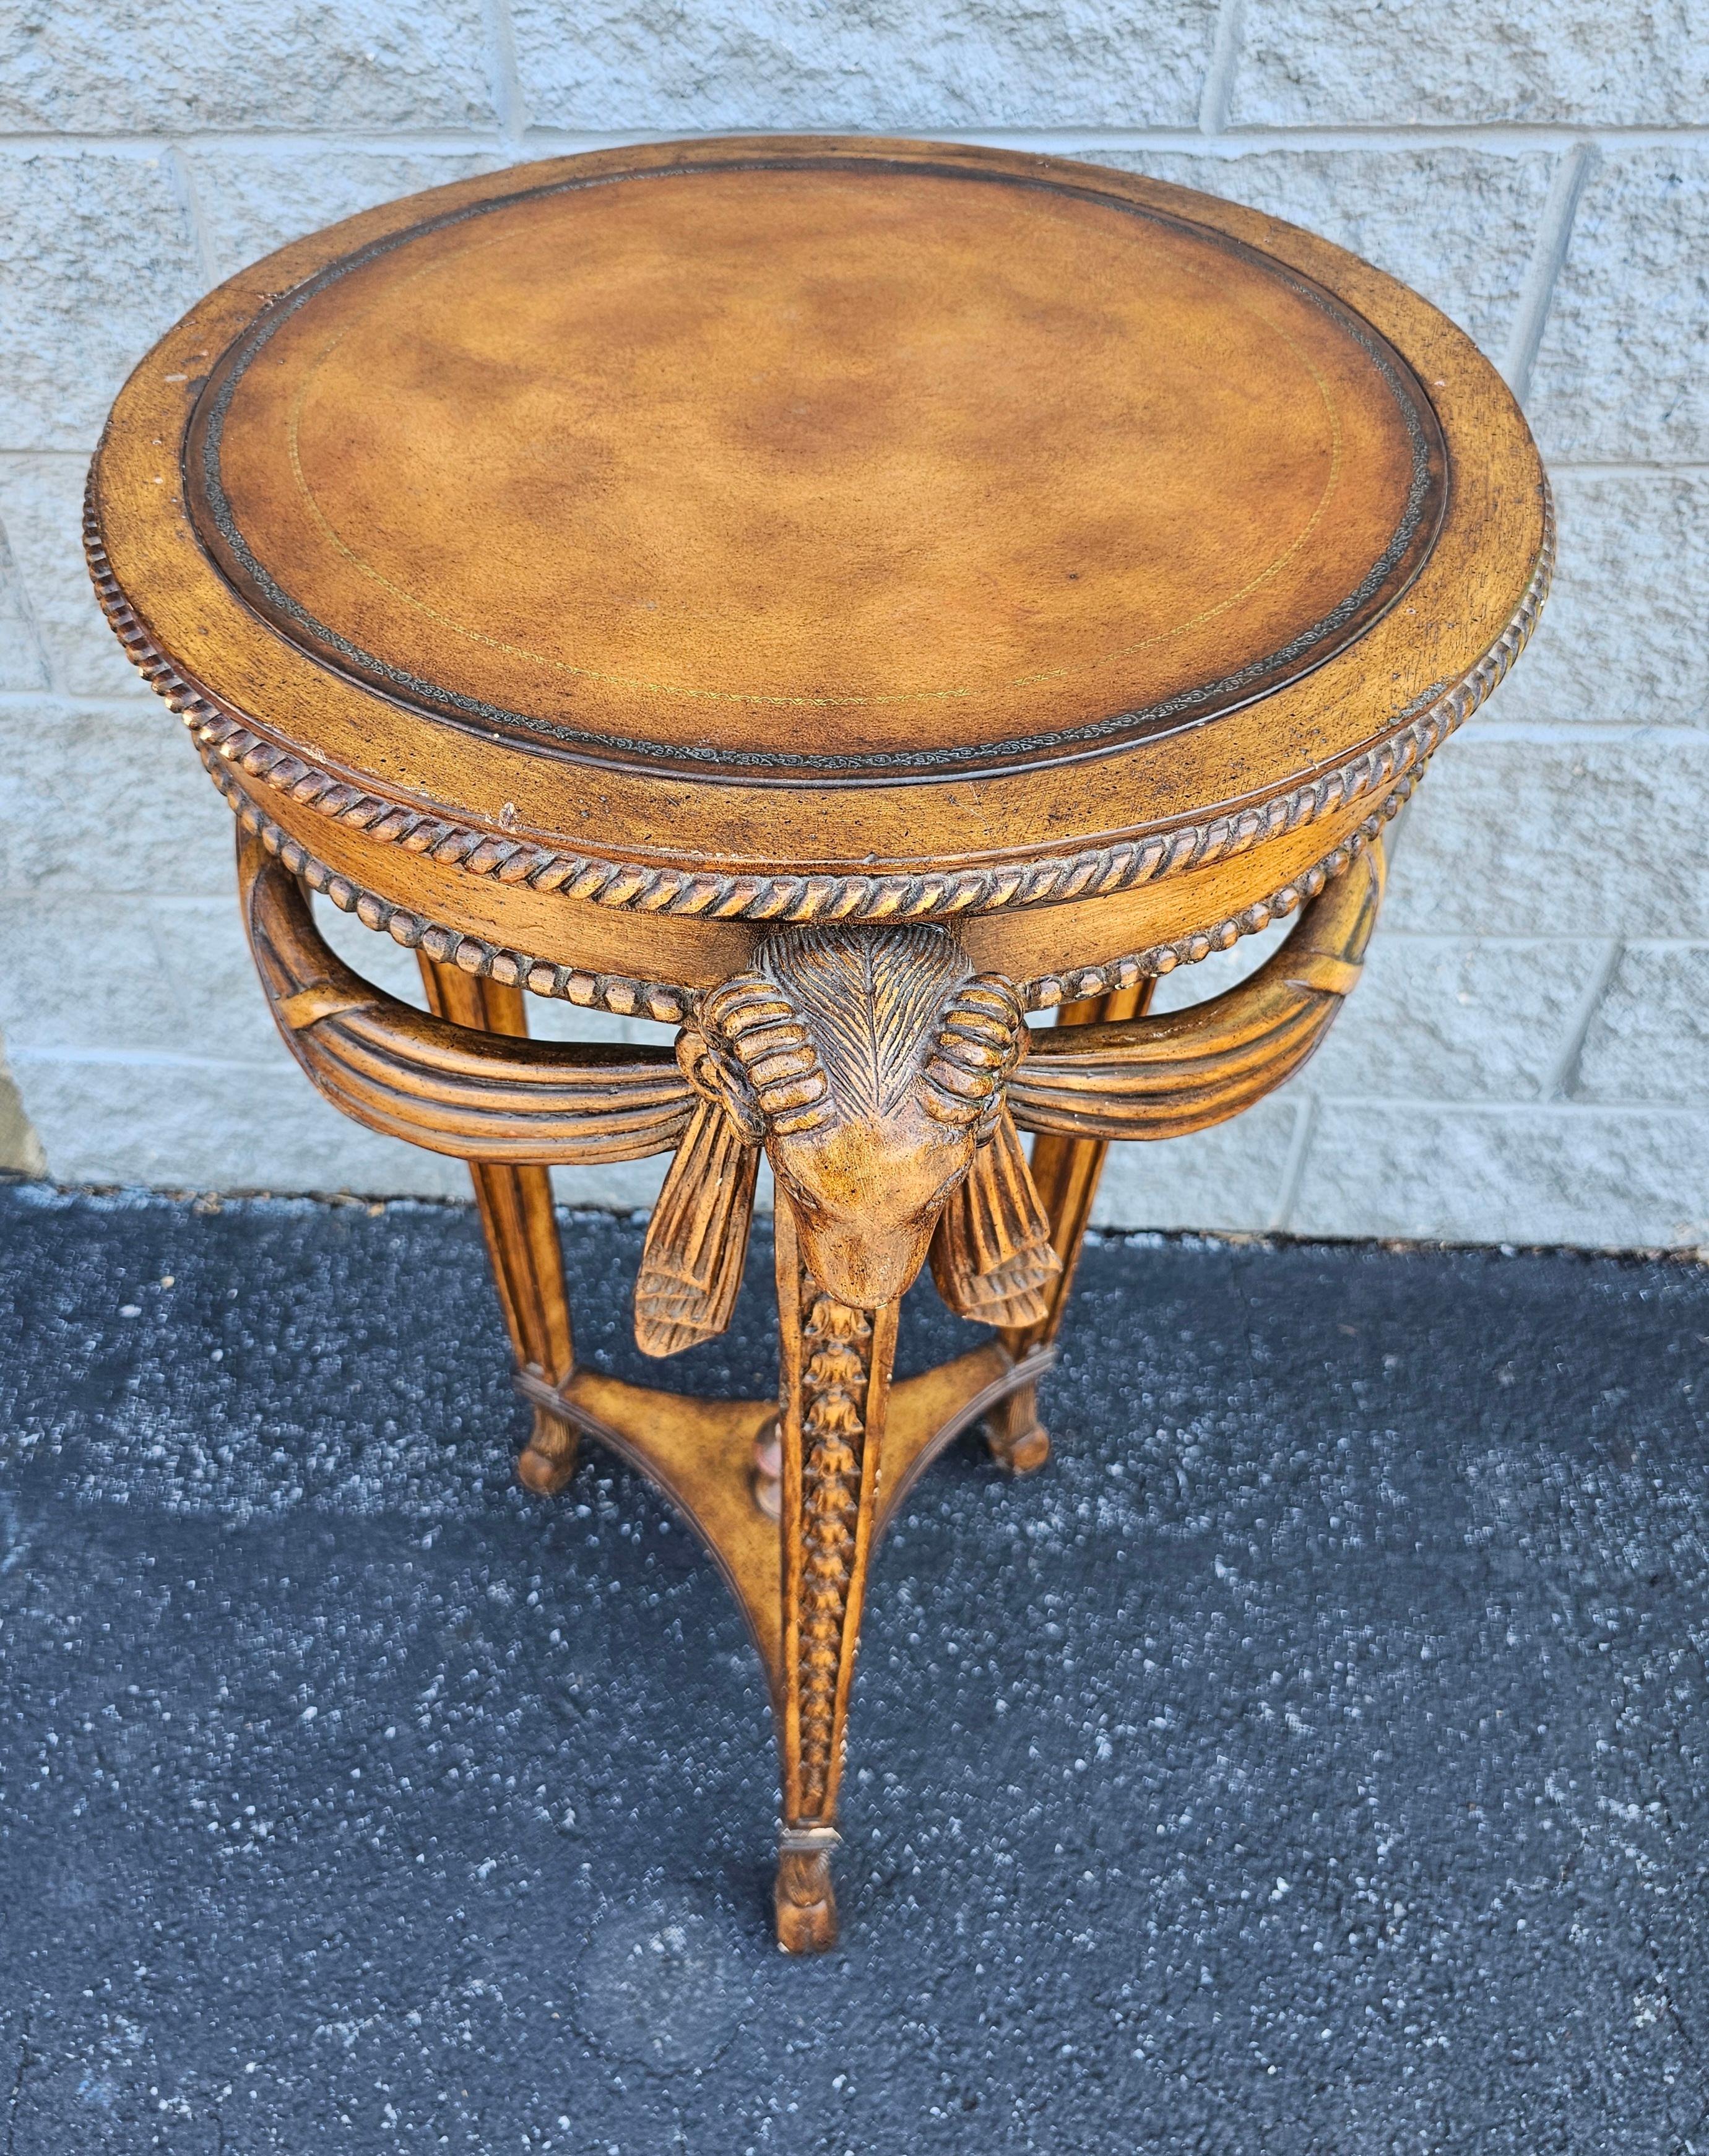 20th Century Neoclassical Style Fruitwood Rams Head and Leather Top Pedestal / Side Table.
Measures 24